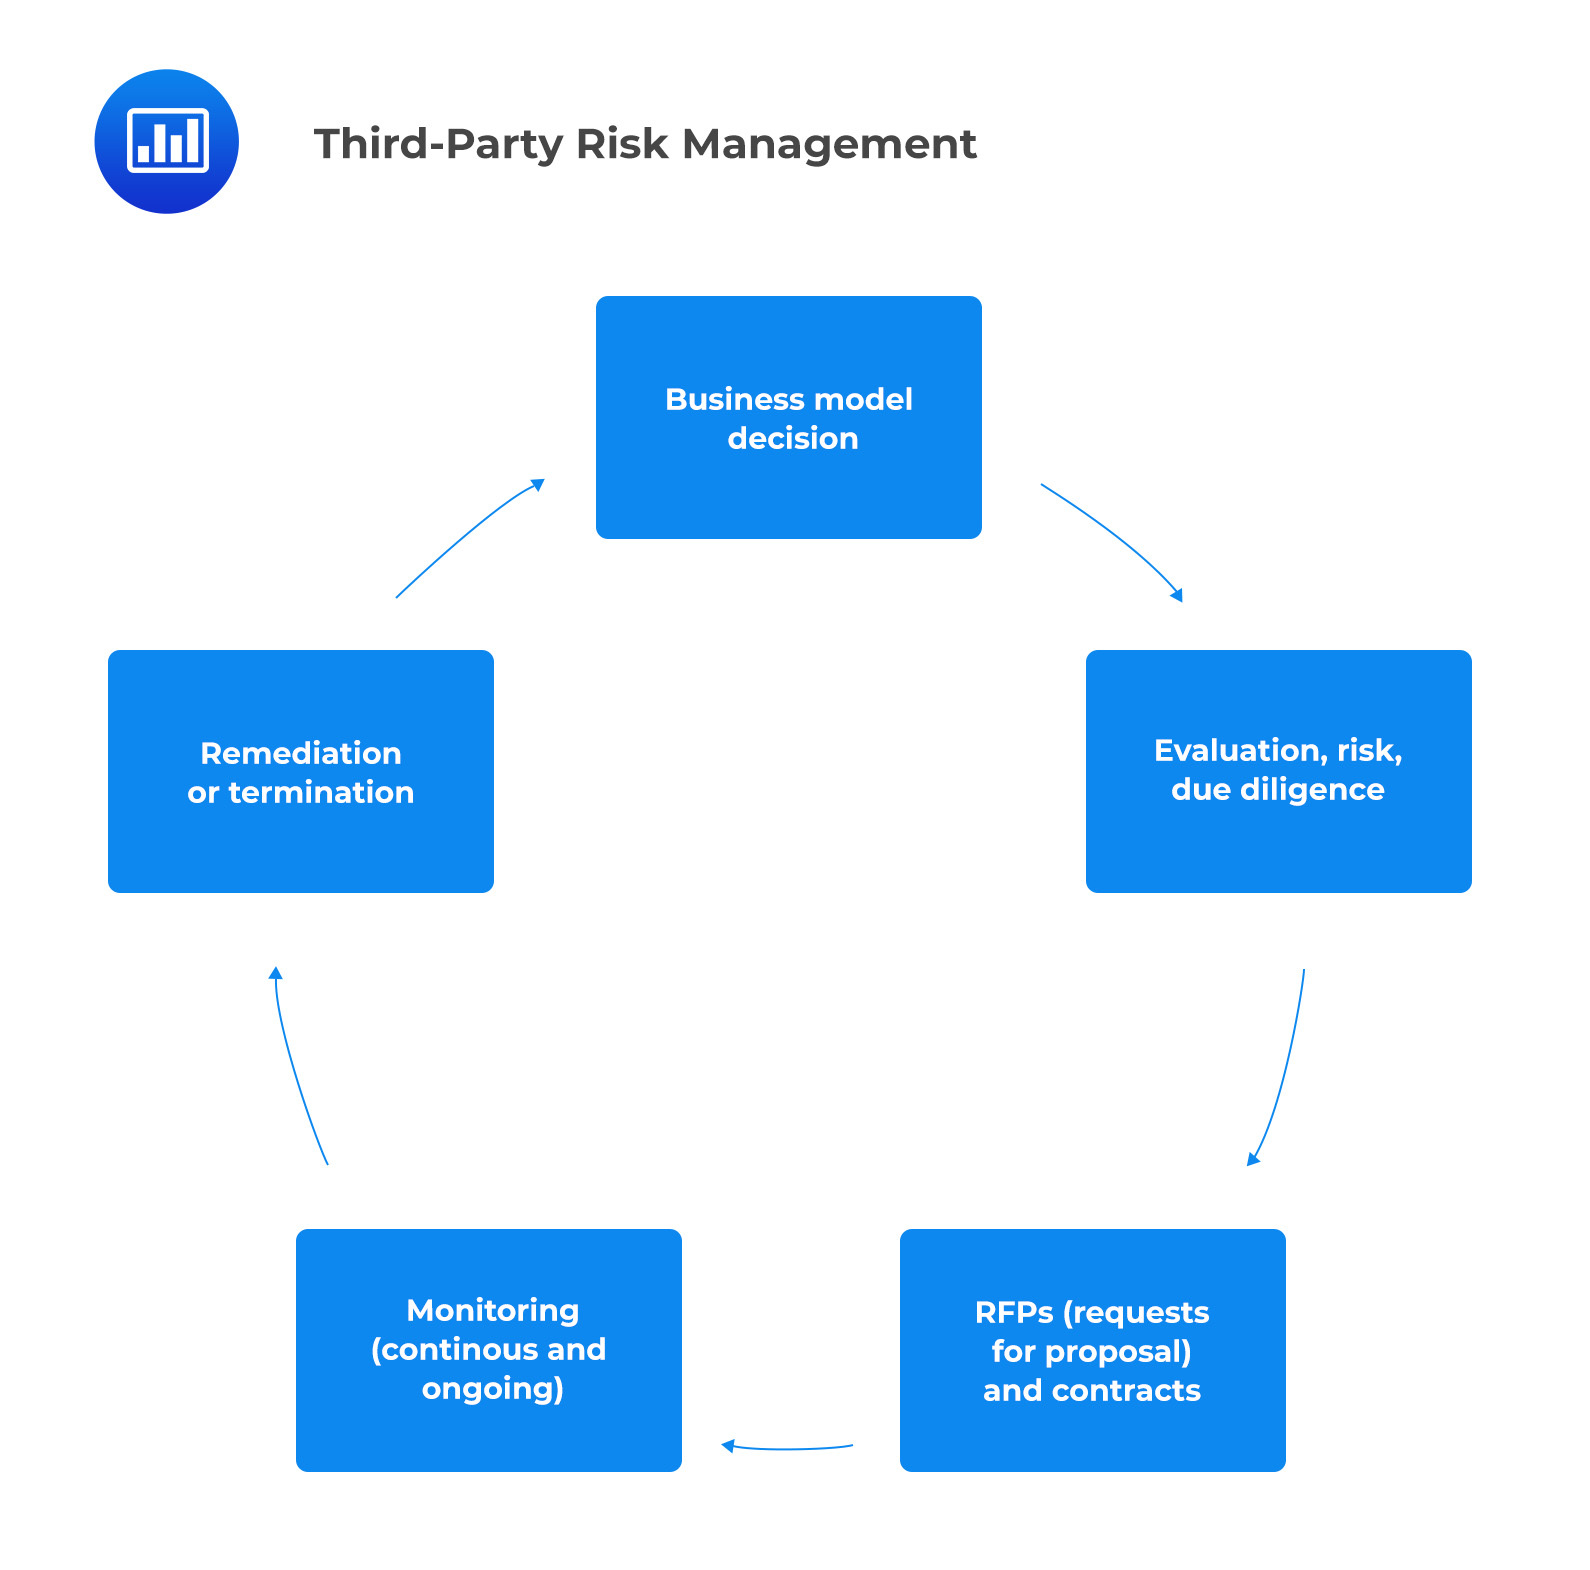 case-study-third-party-risk-management-frm-part-2-notes-analystprep